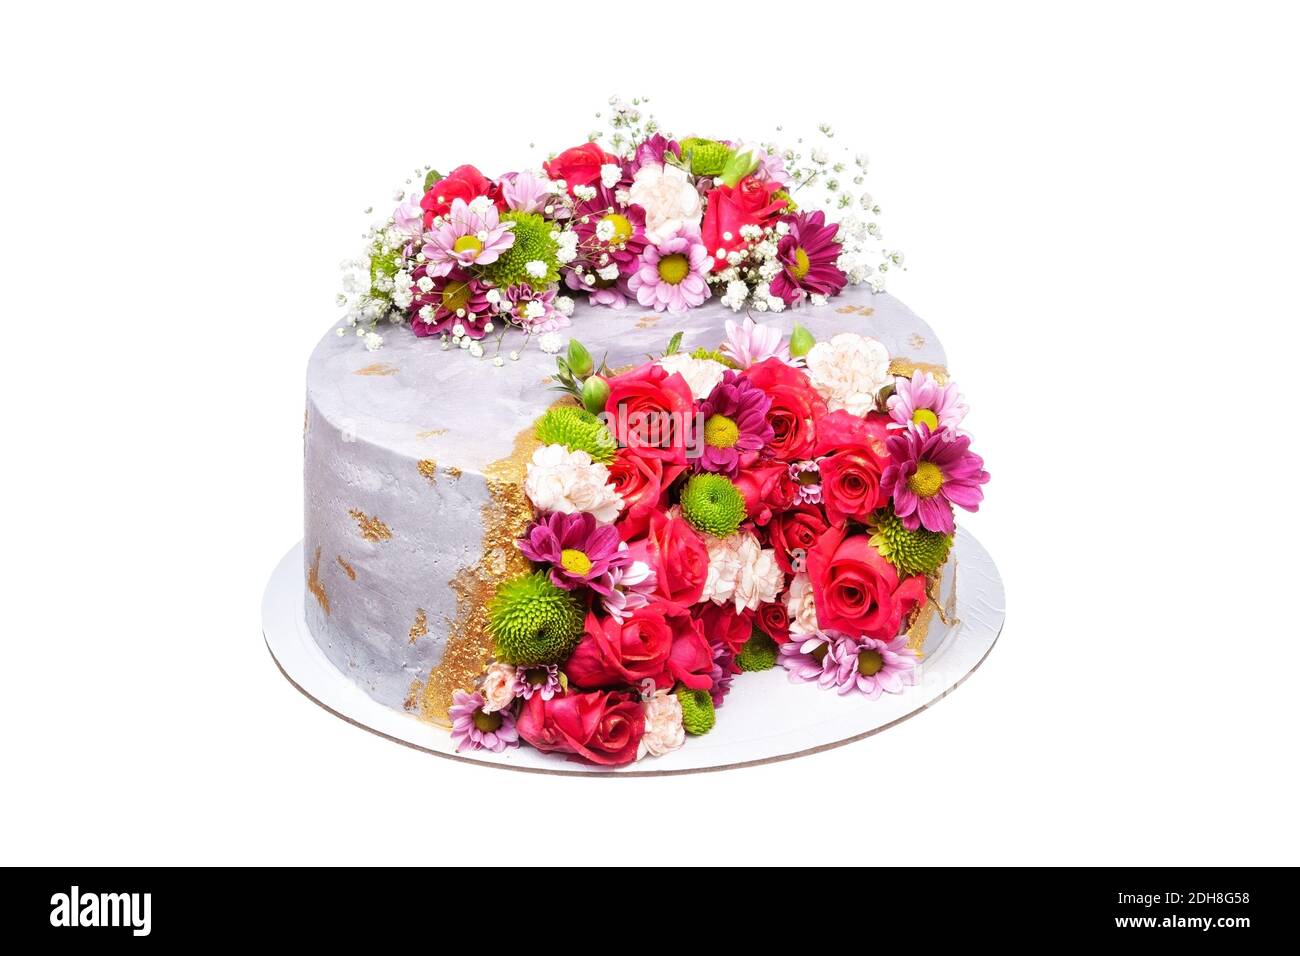 Colorful original flower cake for wedding anniversary. On a white isolated background. Stock Photo